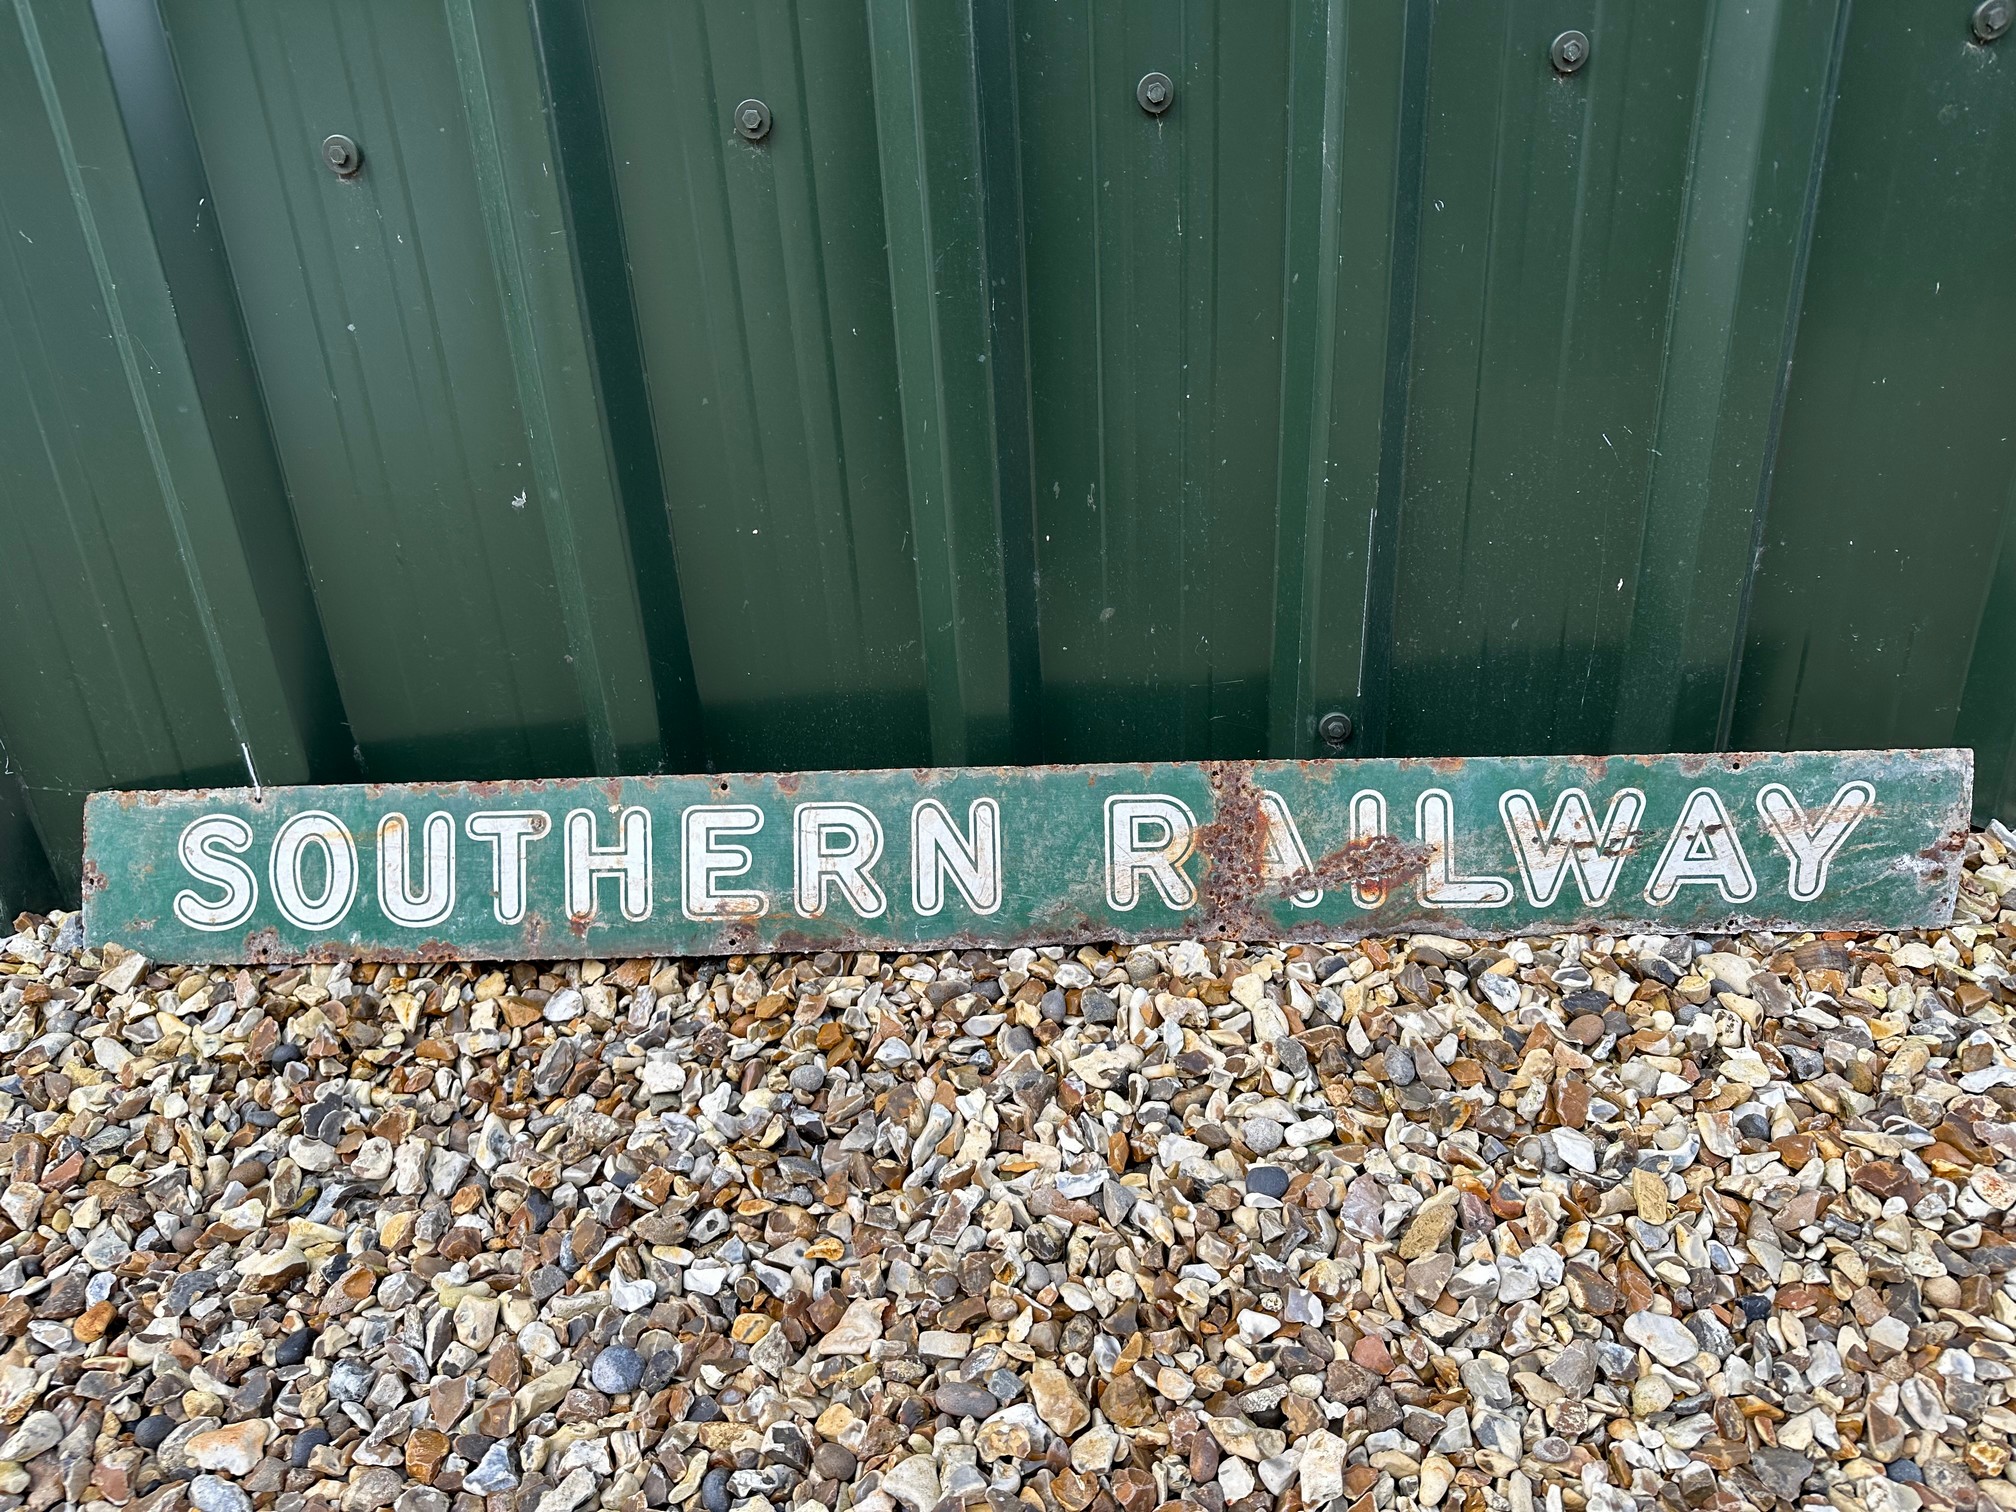 A Southern Railway enamel advertising sign, 52 x 5" by repute from Basingstoke Station.